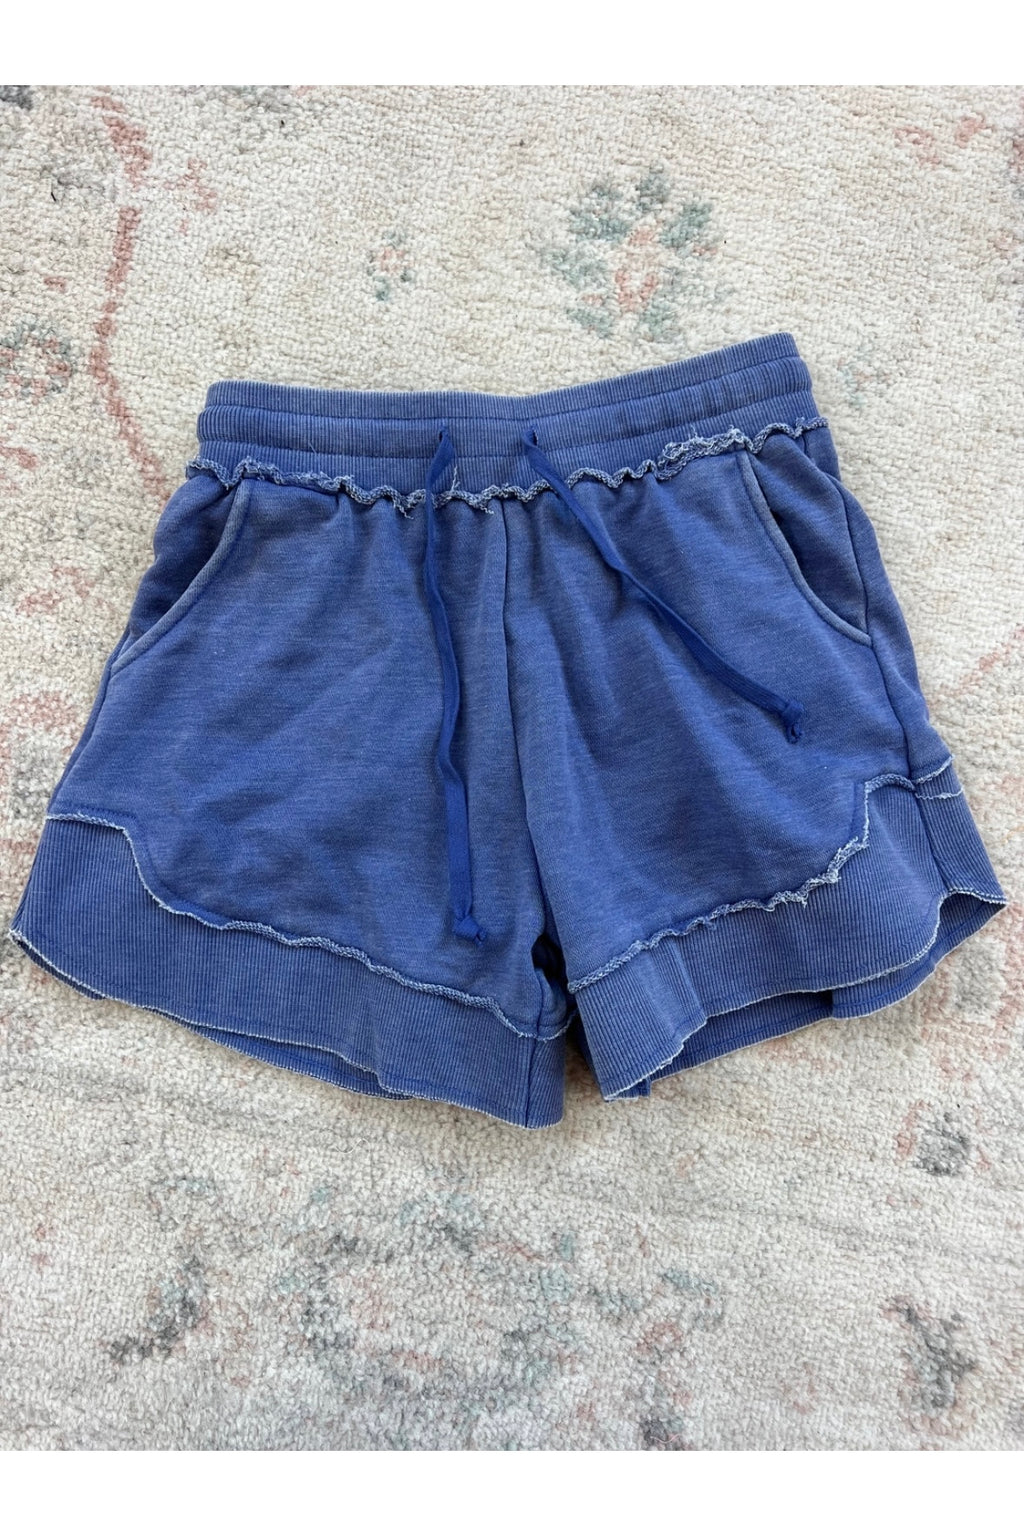 French Terry Stevie Shorts - Marlin Blue